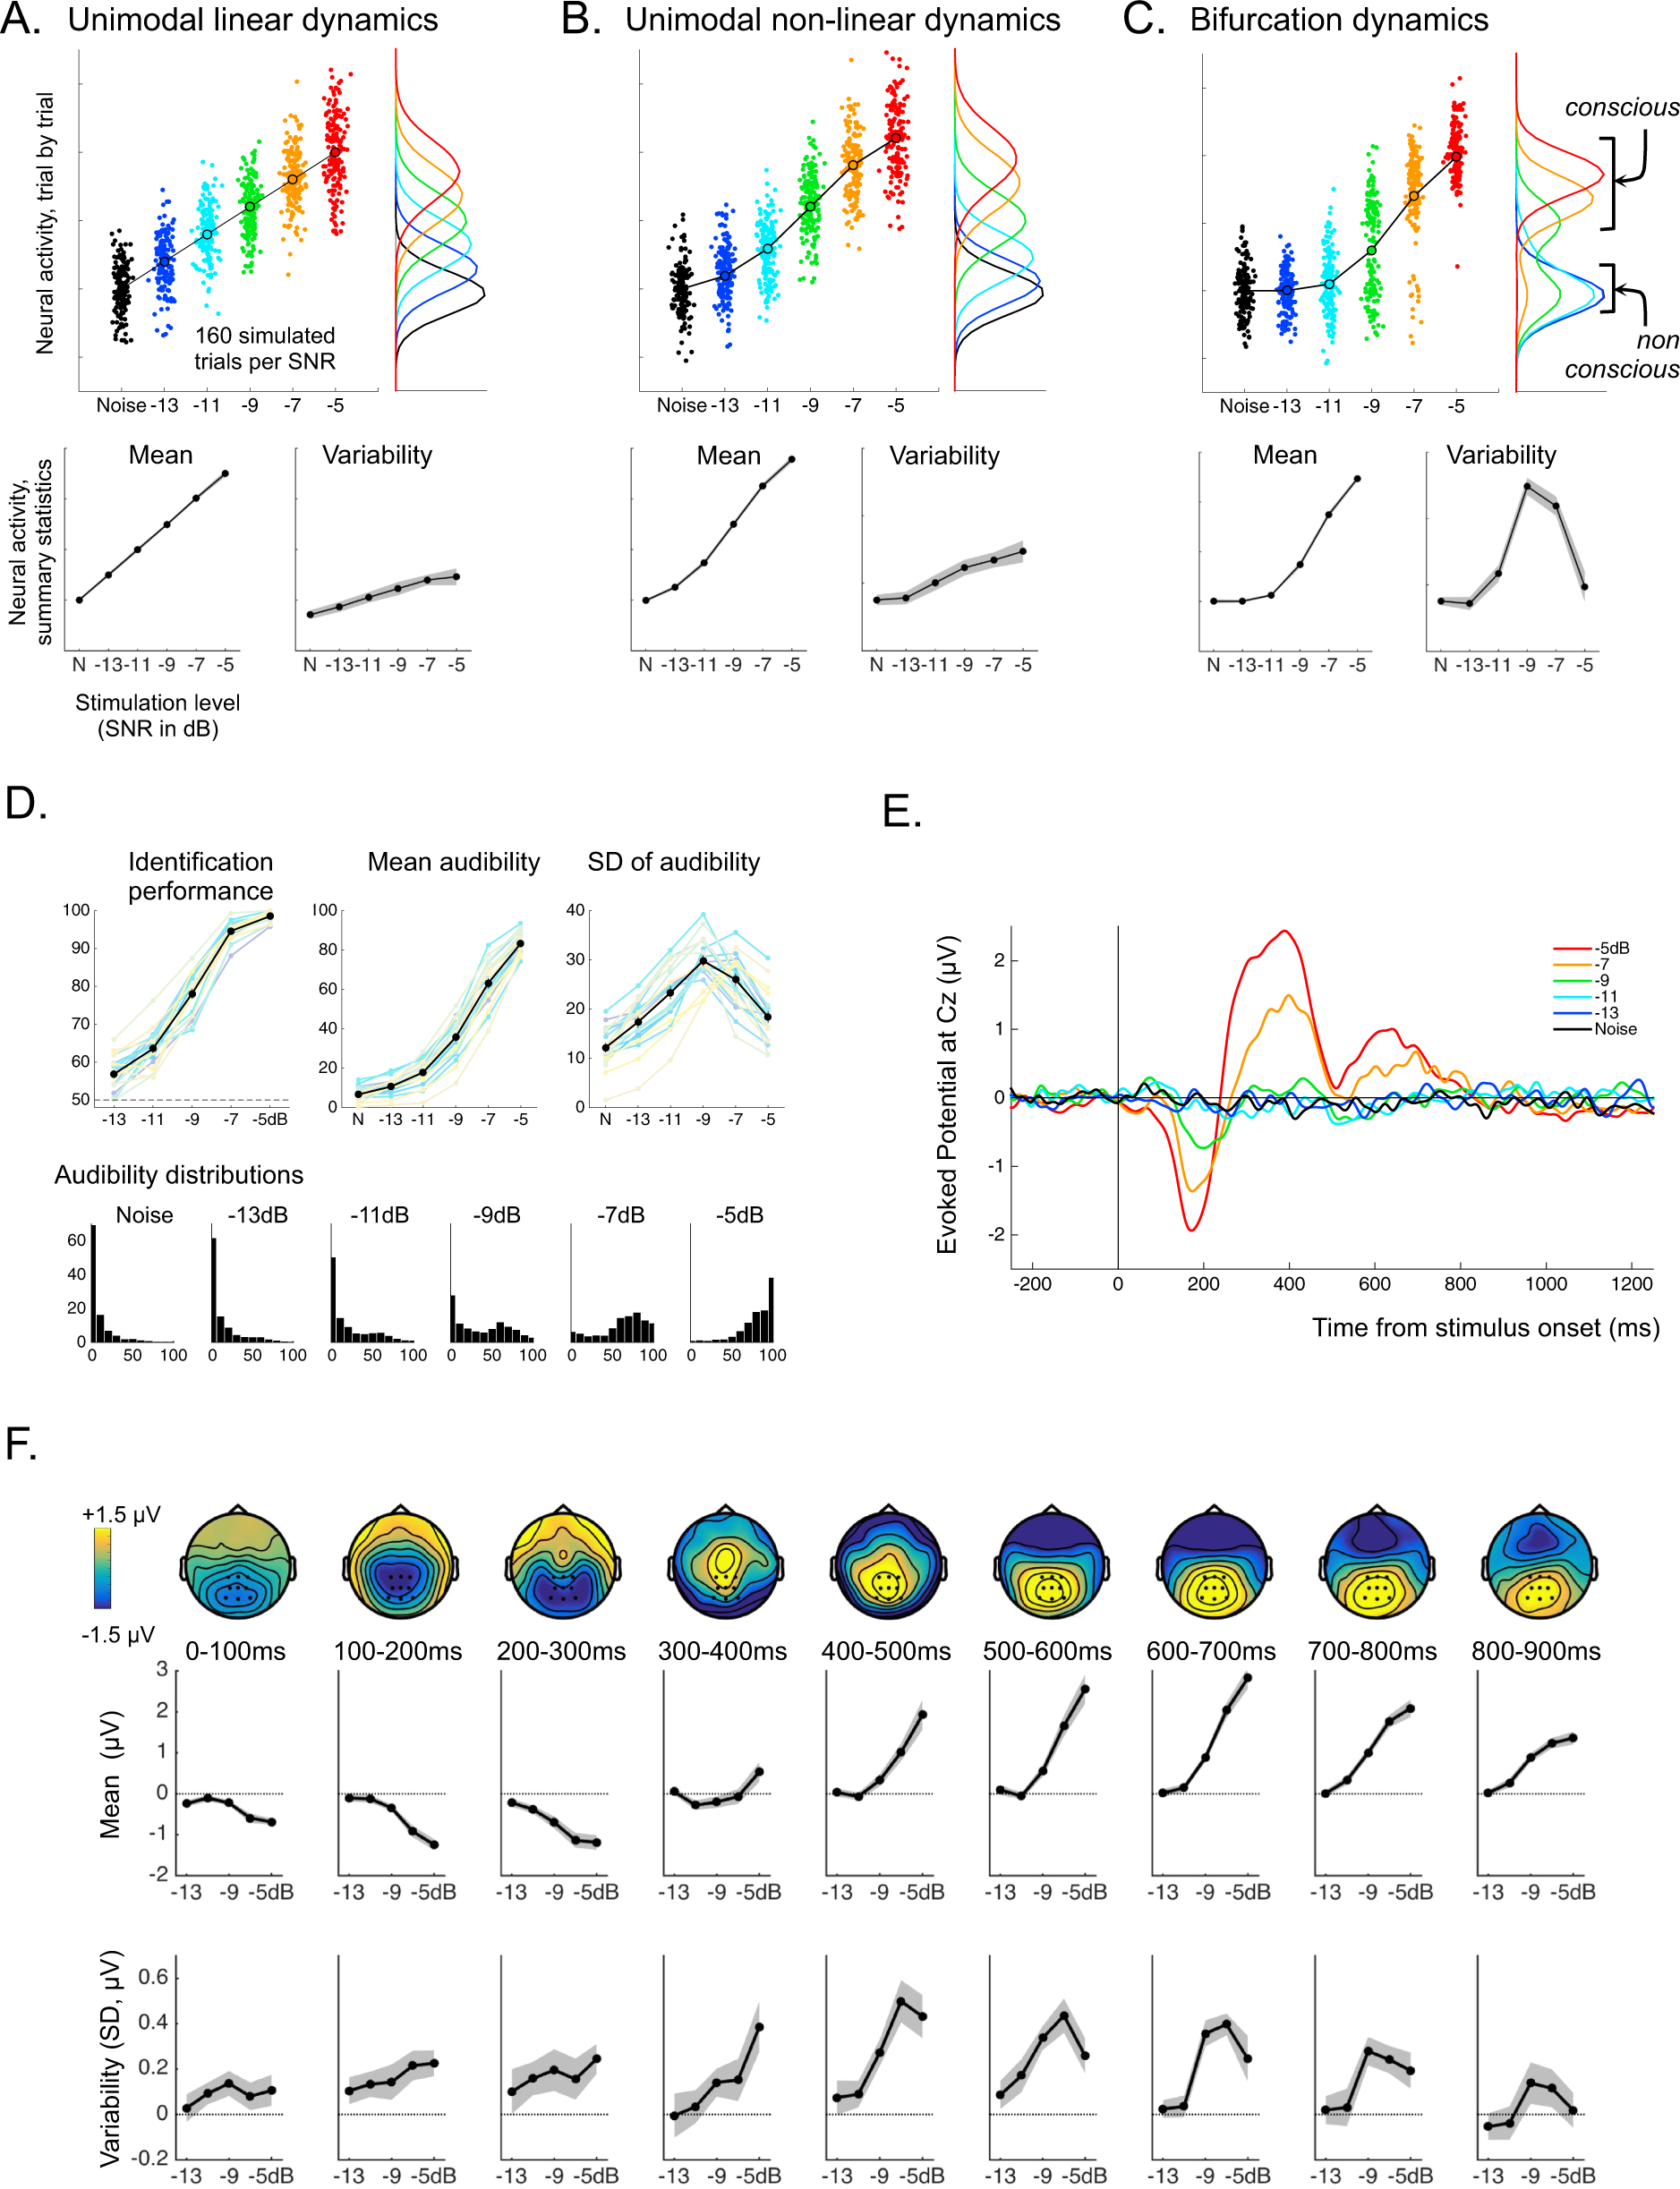 Bifurcation in brain dynamics reveals a signature of conscious processing  independent of report | Nature Communications